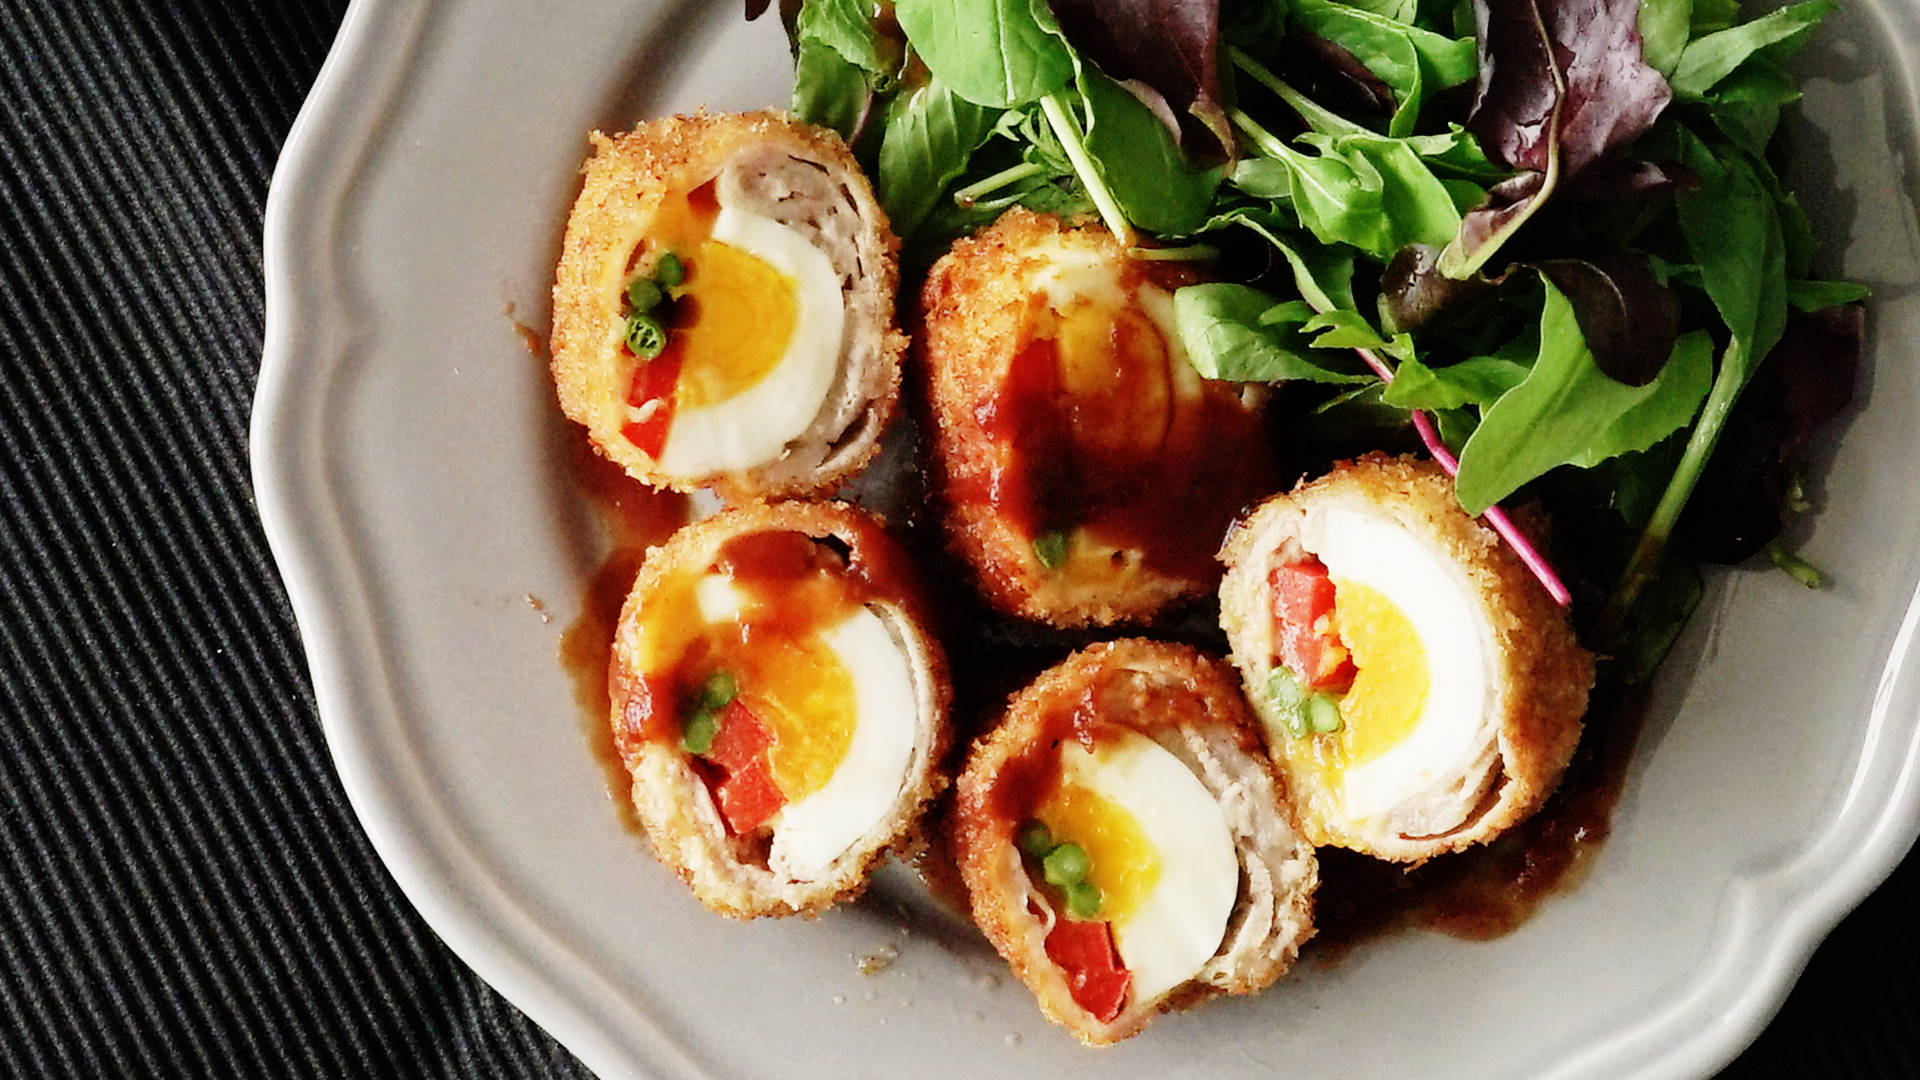 Scotch Eggs With Vegetables And Red Sauce Wallpaper